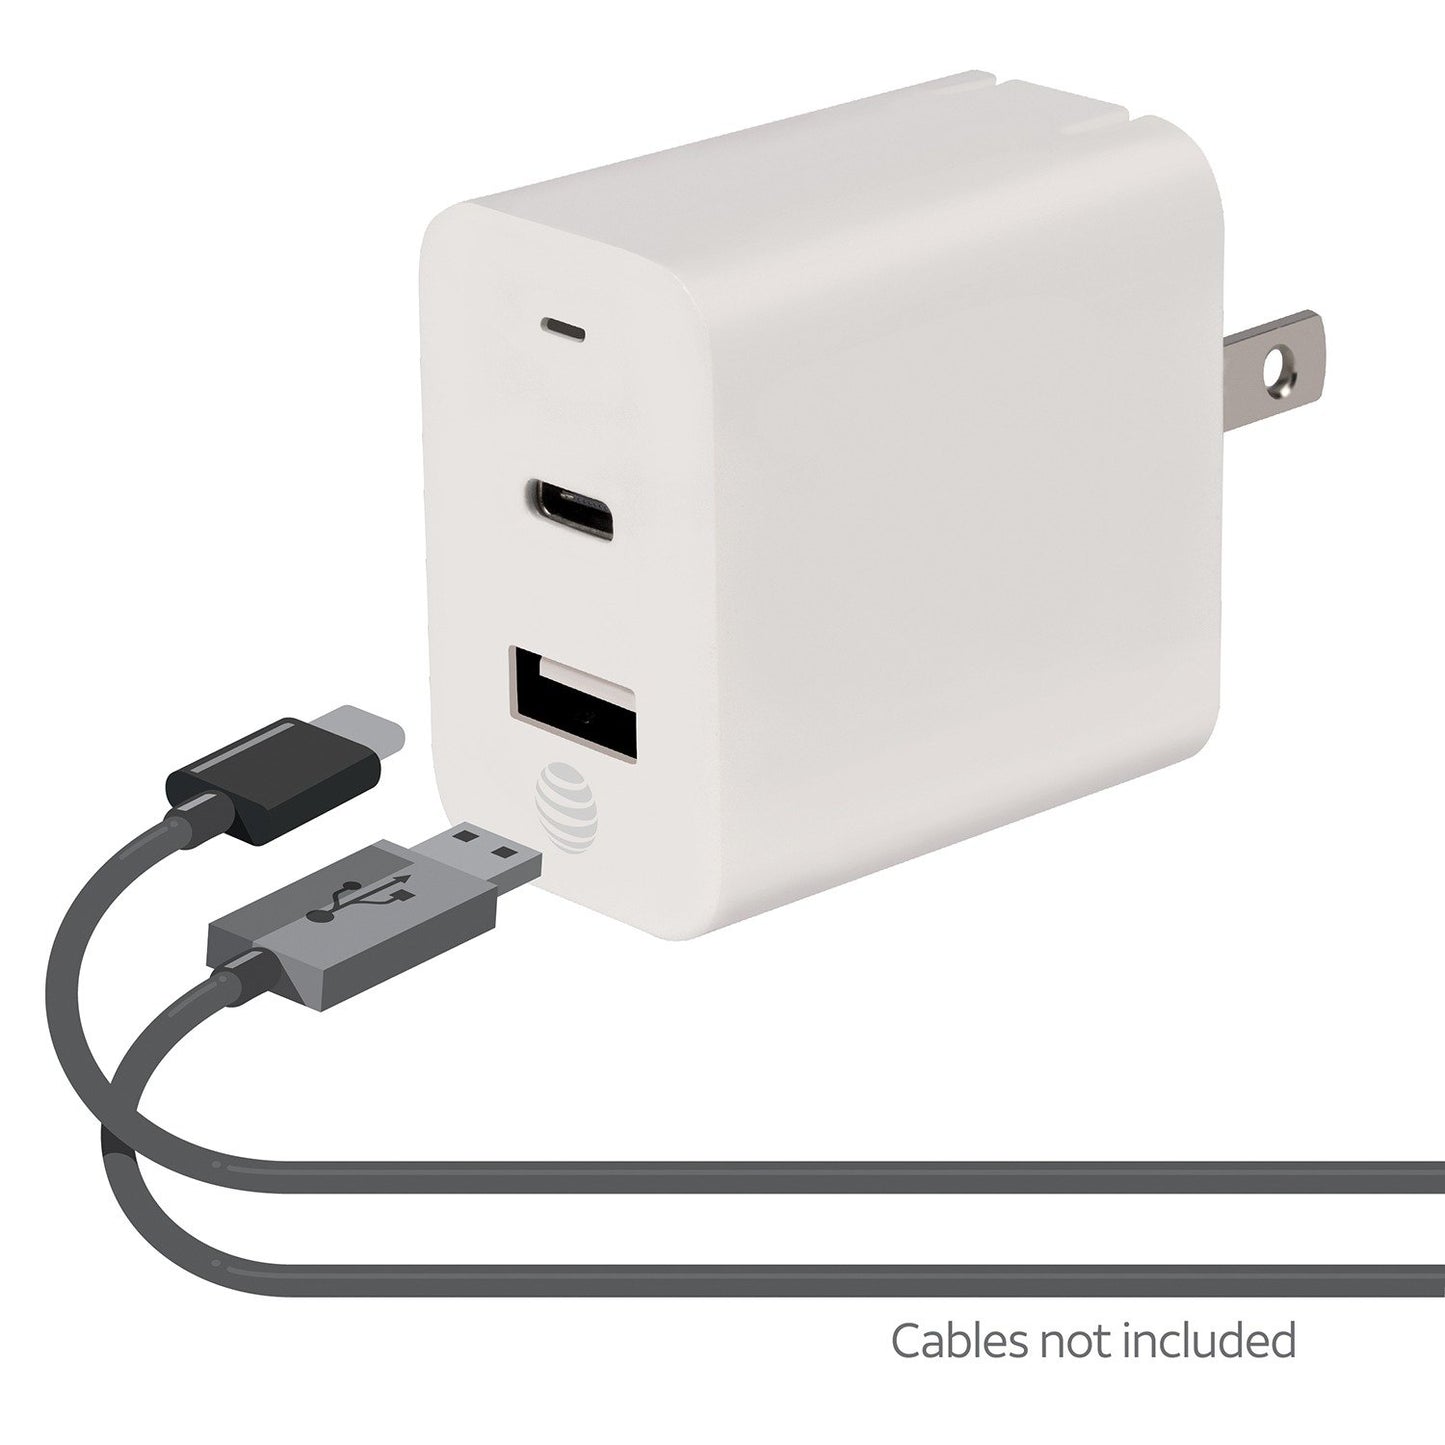 AT&T  PDCU18 18W USB and Type-C Power Adapter